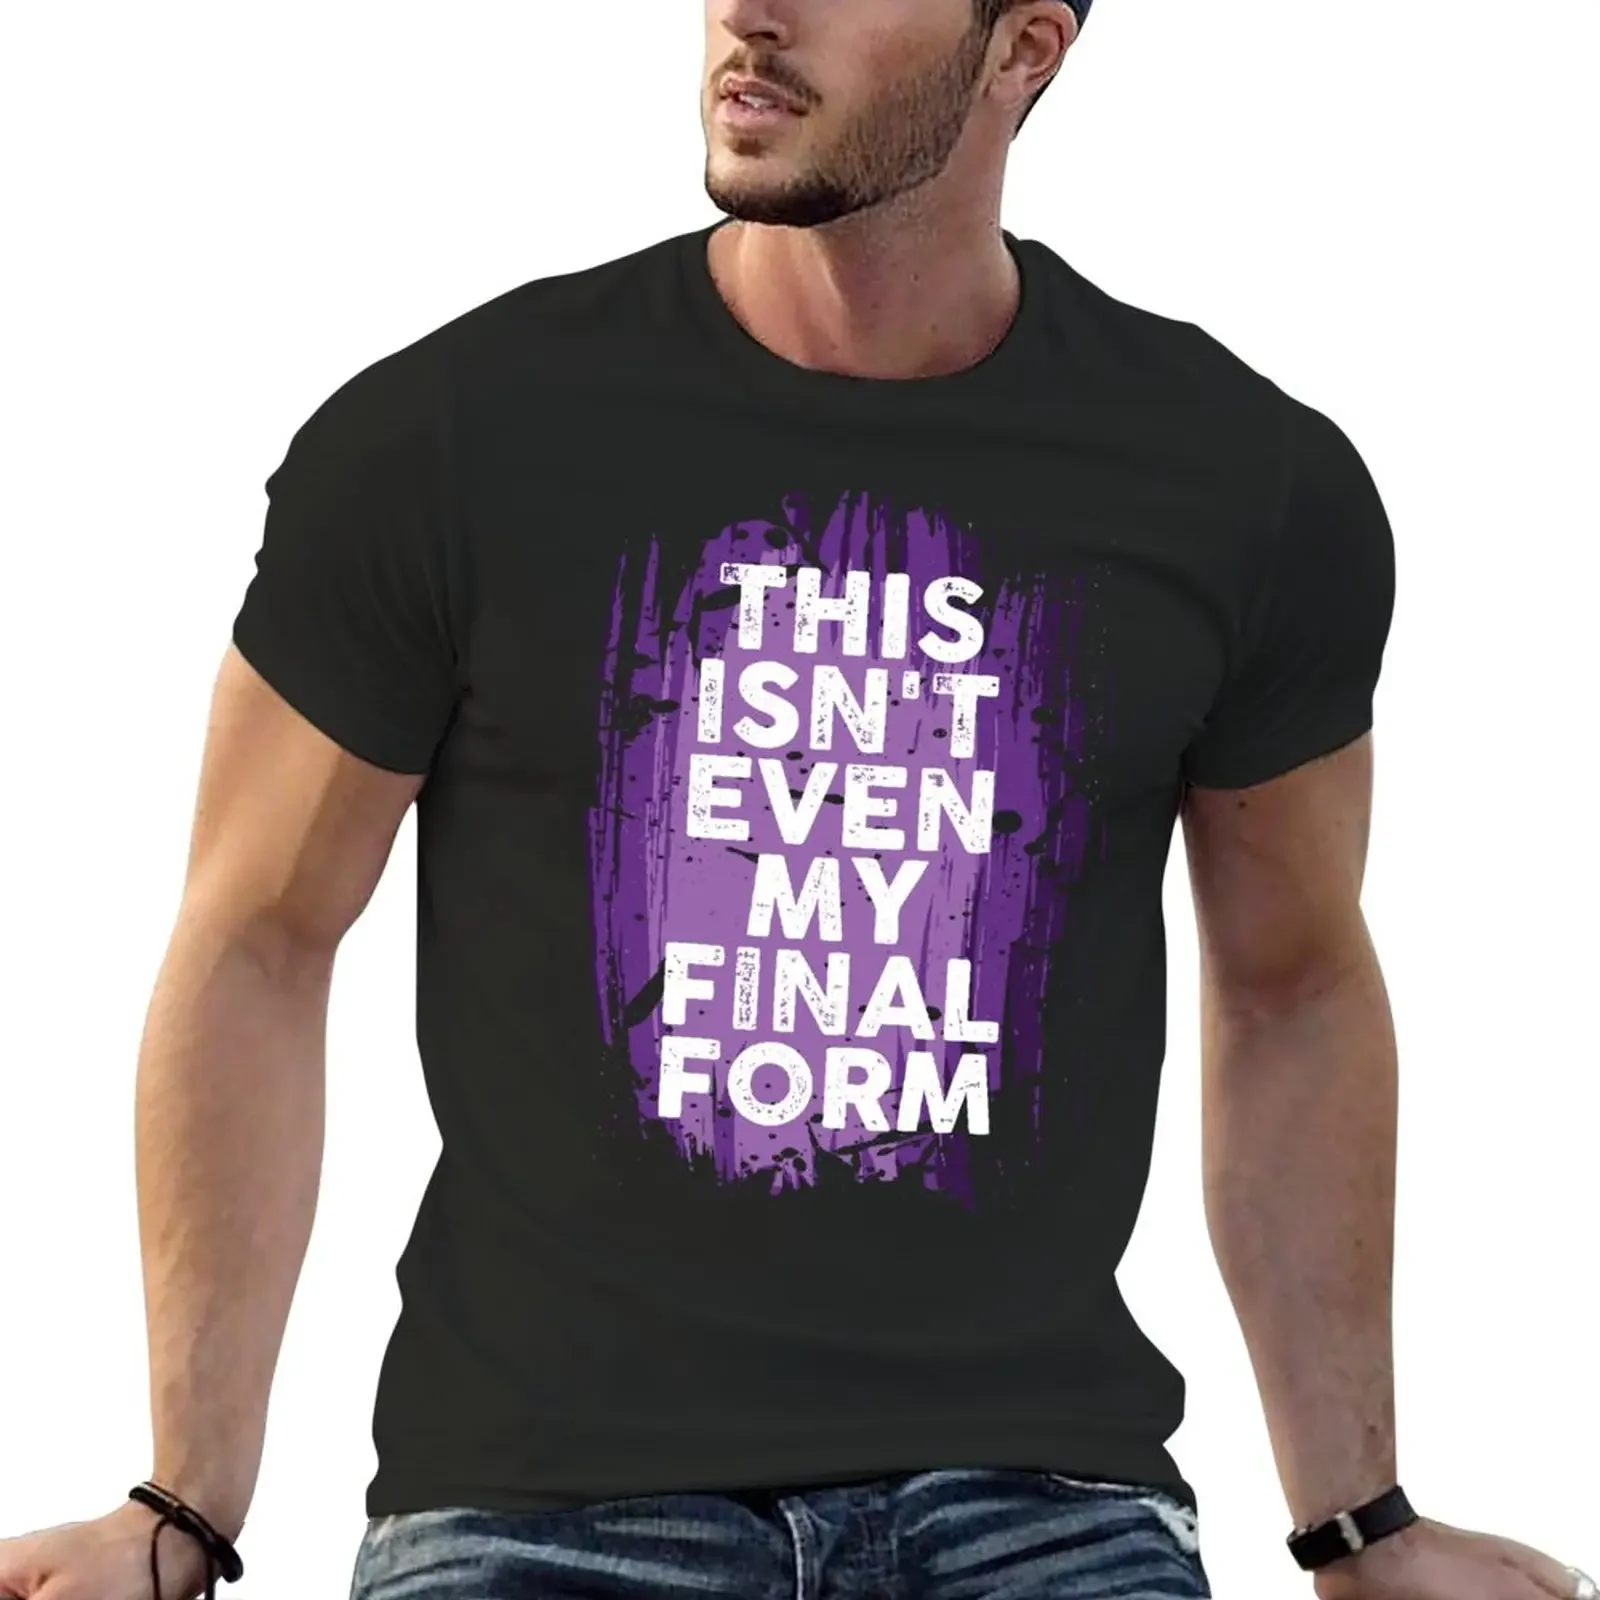 

This Isn't Even My Final Form T-Shirt oversized new edition sports fans black t-shirts for men